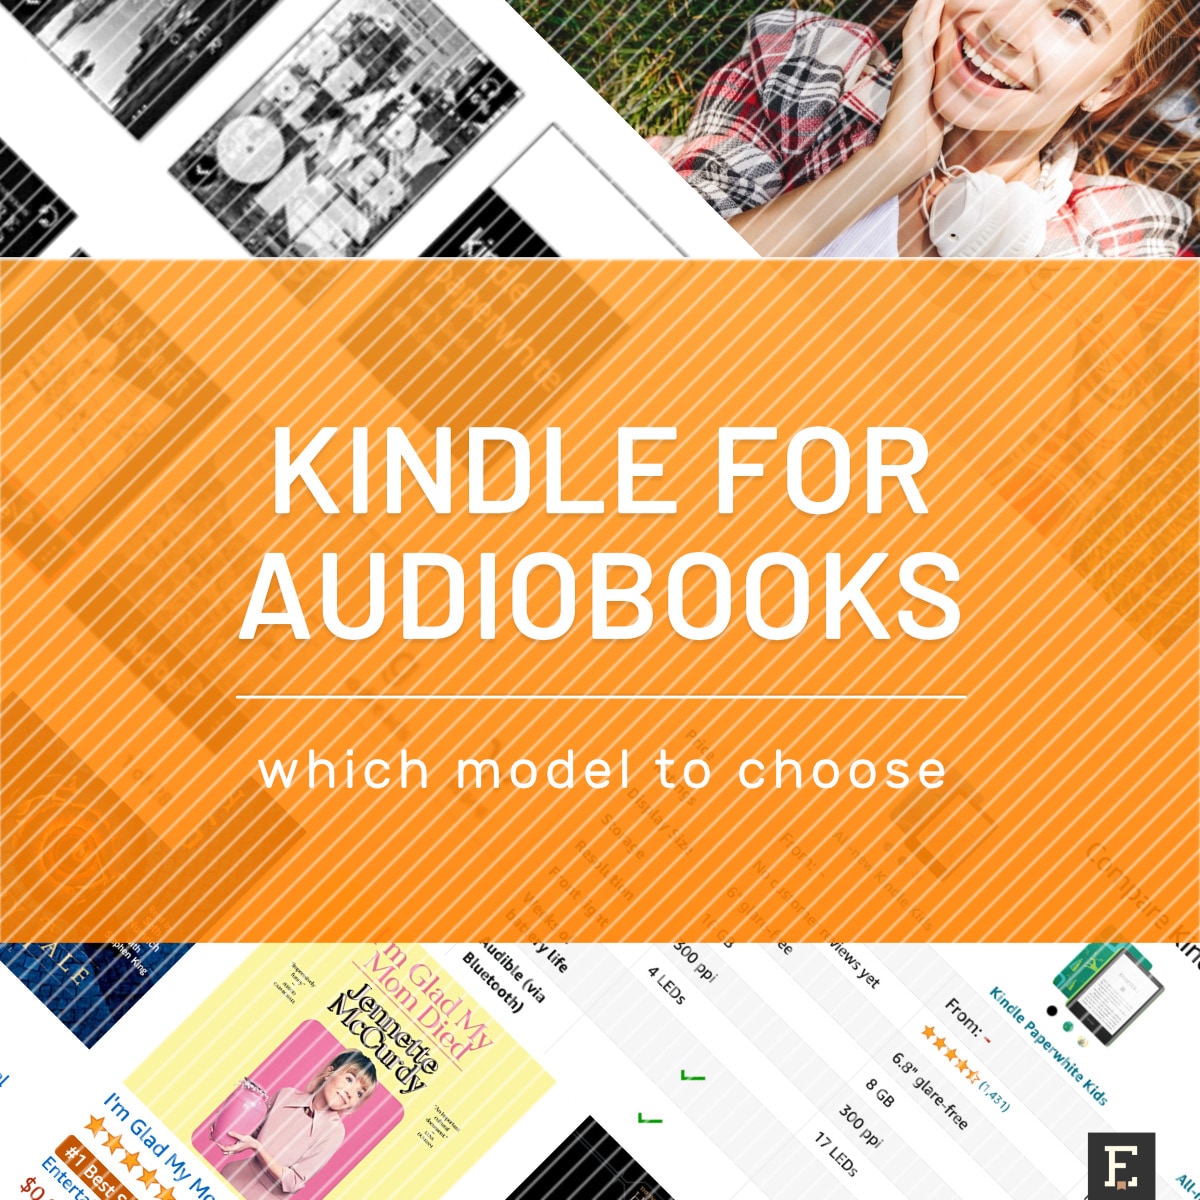 Best Kindle for audiobooks